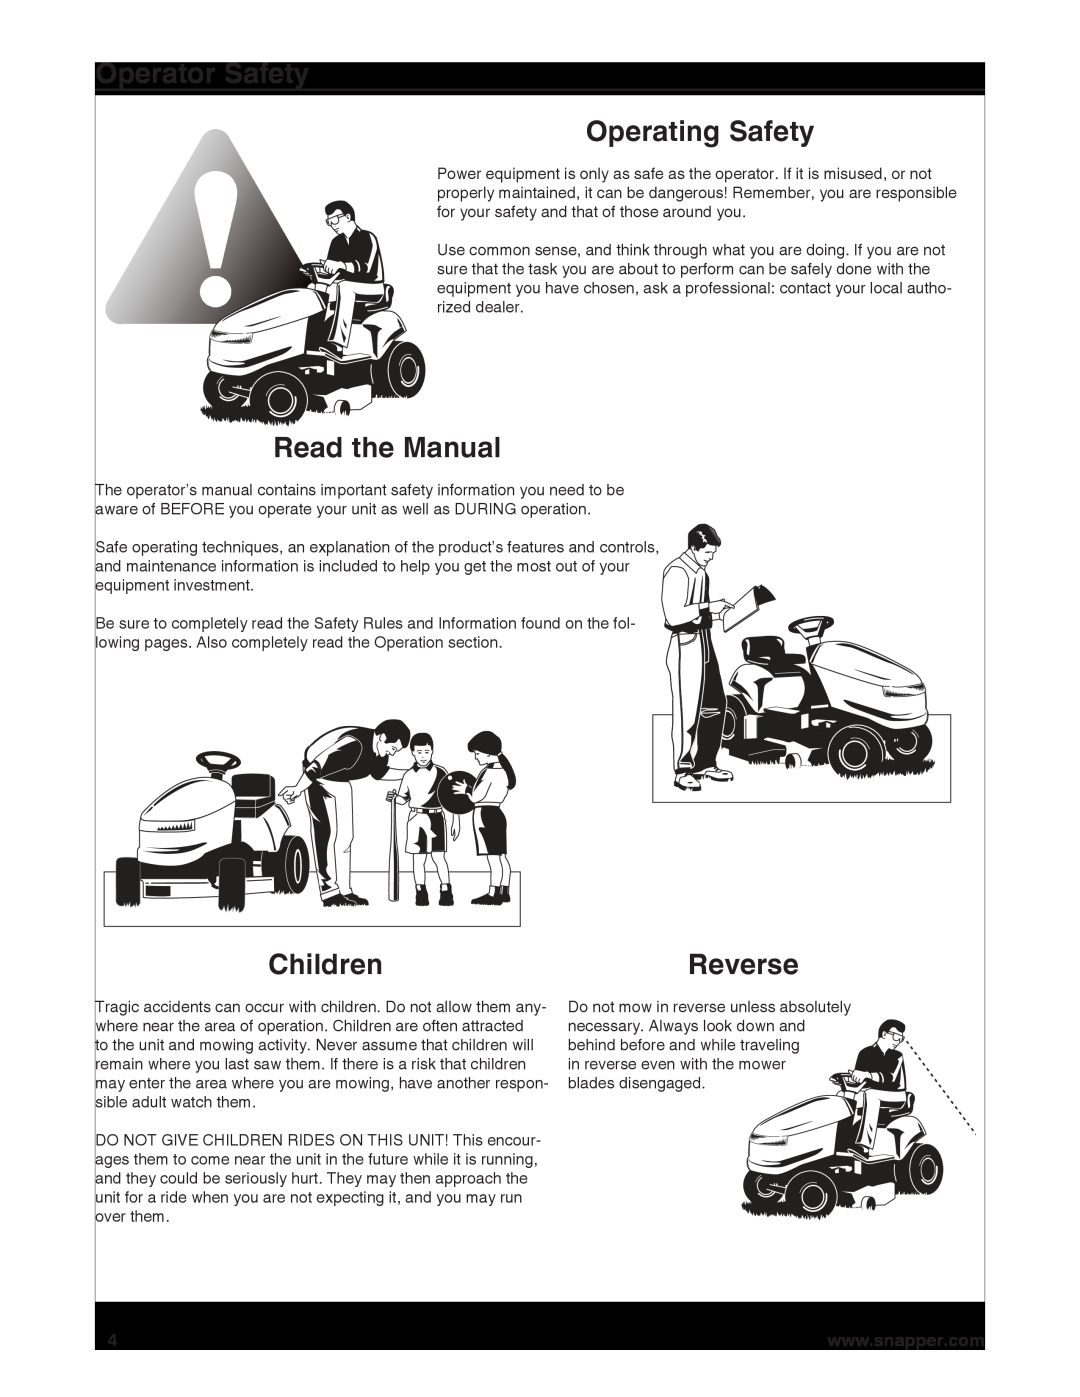 Briggs & Stratton 7800918-00 manual Operator Safety Operating Safety, Read the Manual, ChildrenC il renReproductioReversen 